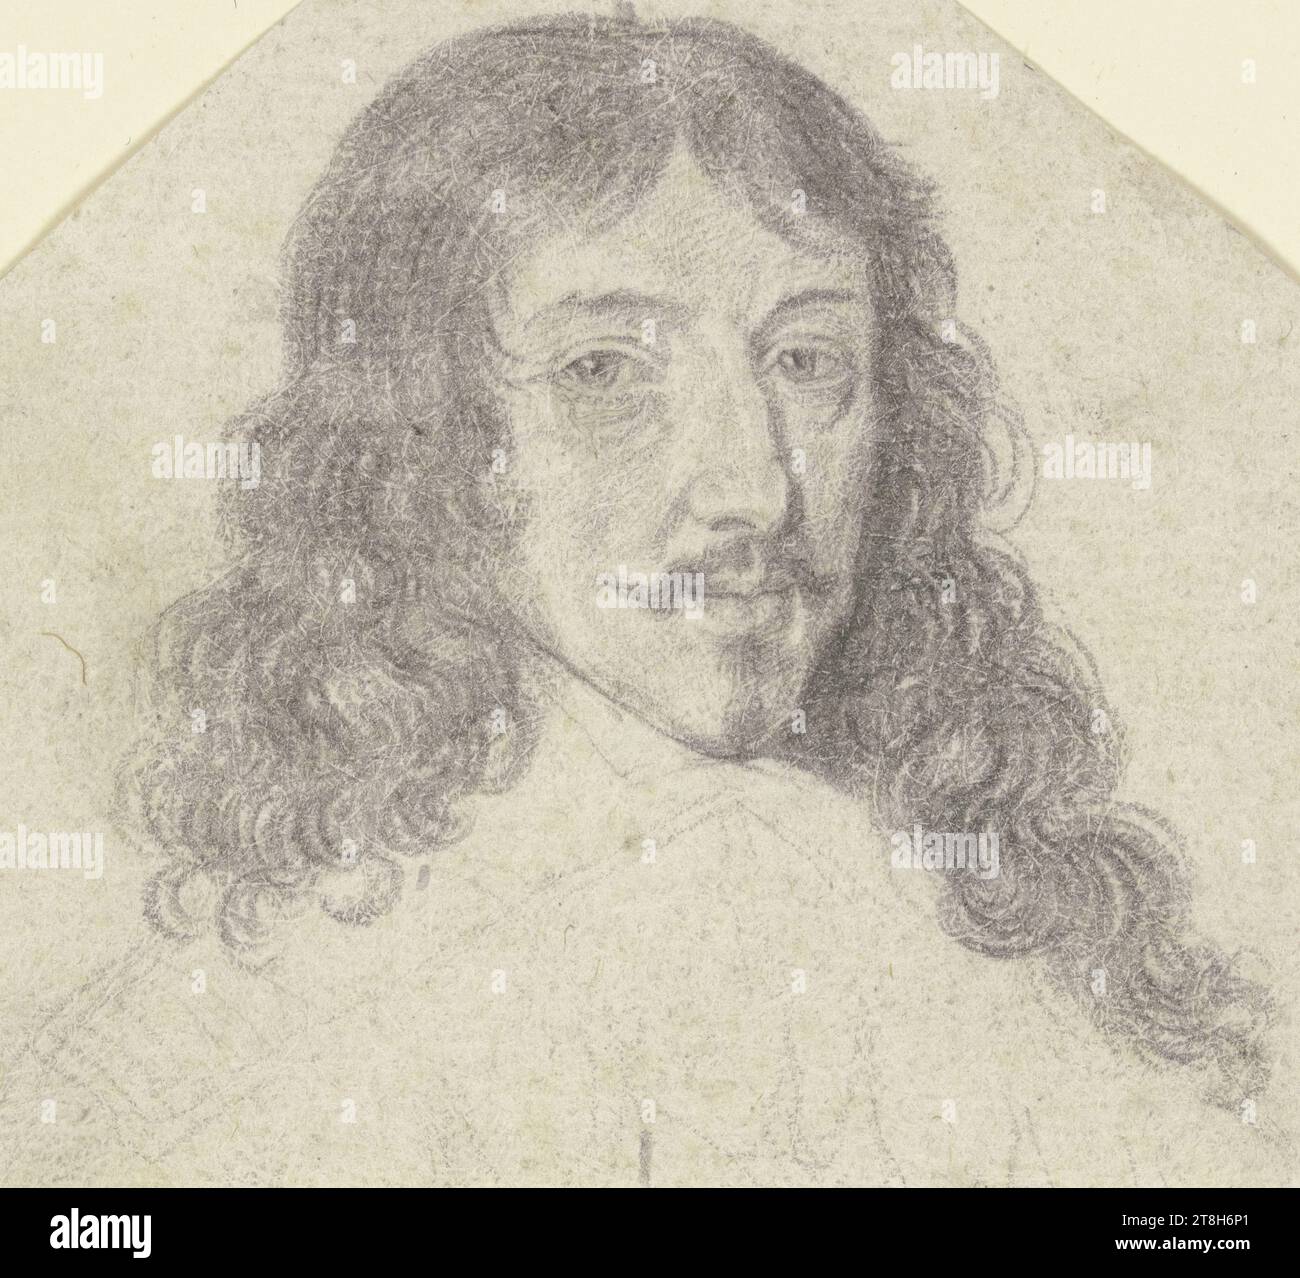 ROBERT NANTEUIL, portrait of Louis XIII, King of France, sheet, max. 65 x max. 72 mm, black chalk on vergé paper, portrait of Louis on vergé paper, CHALK, VERGÉ PAPER, CHALK DRAWING, FRENCH, PORTRAIT STUDY, SKETCH Stock Photo